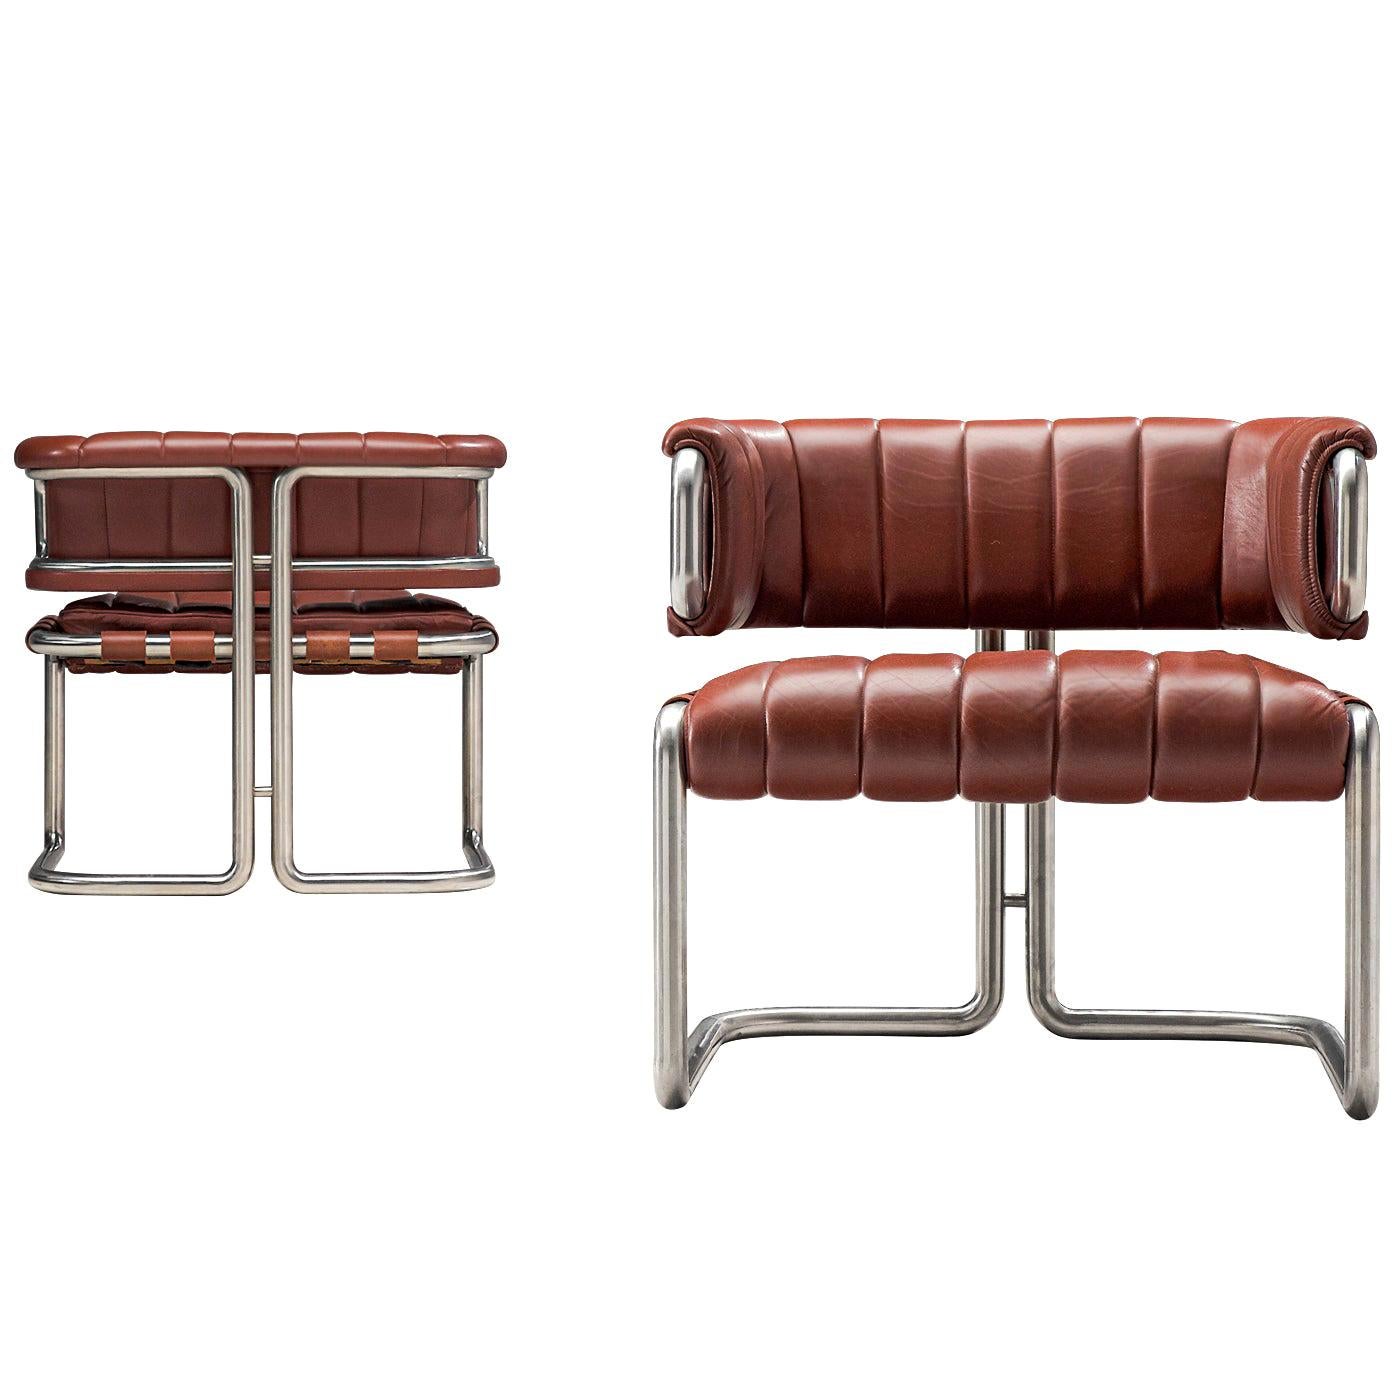 Set of Cubist Tubular Lounge Chairs in Red Leather